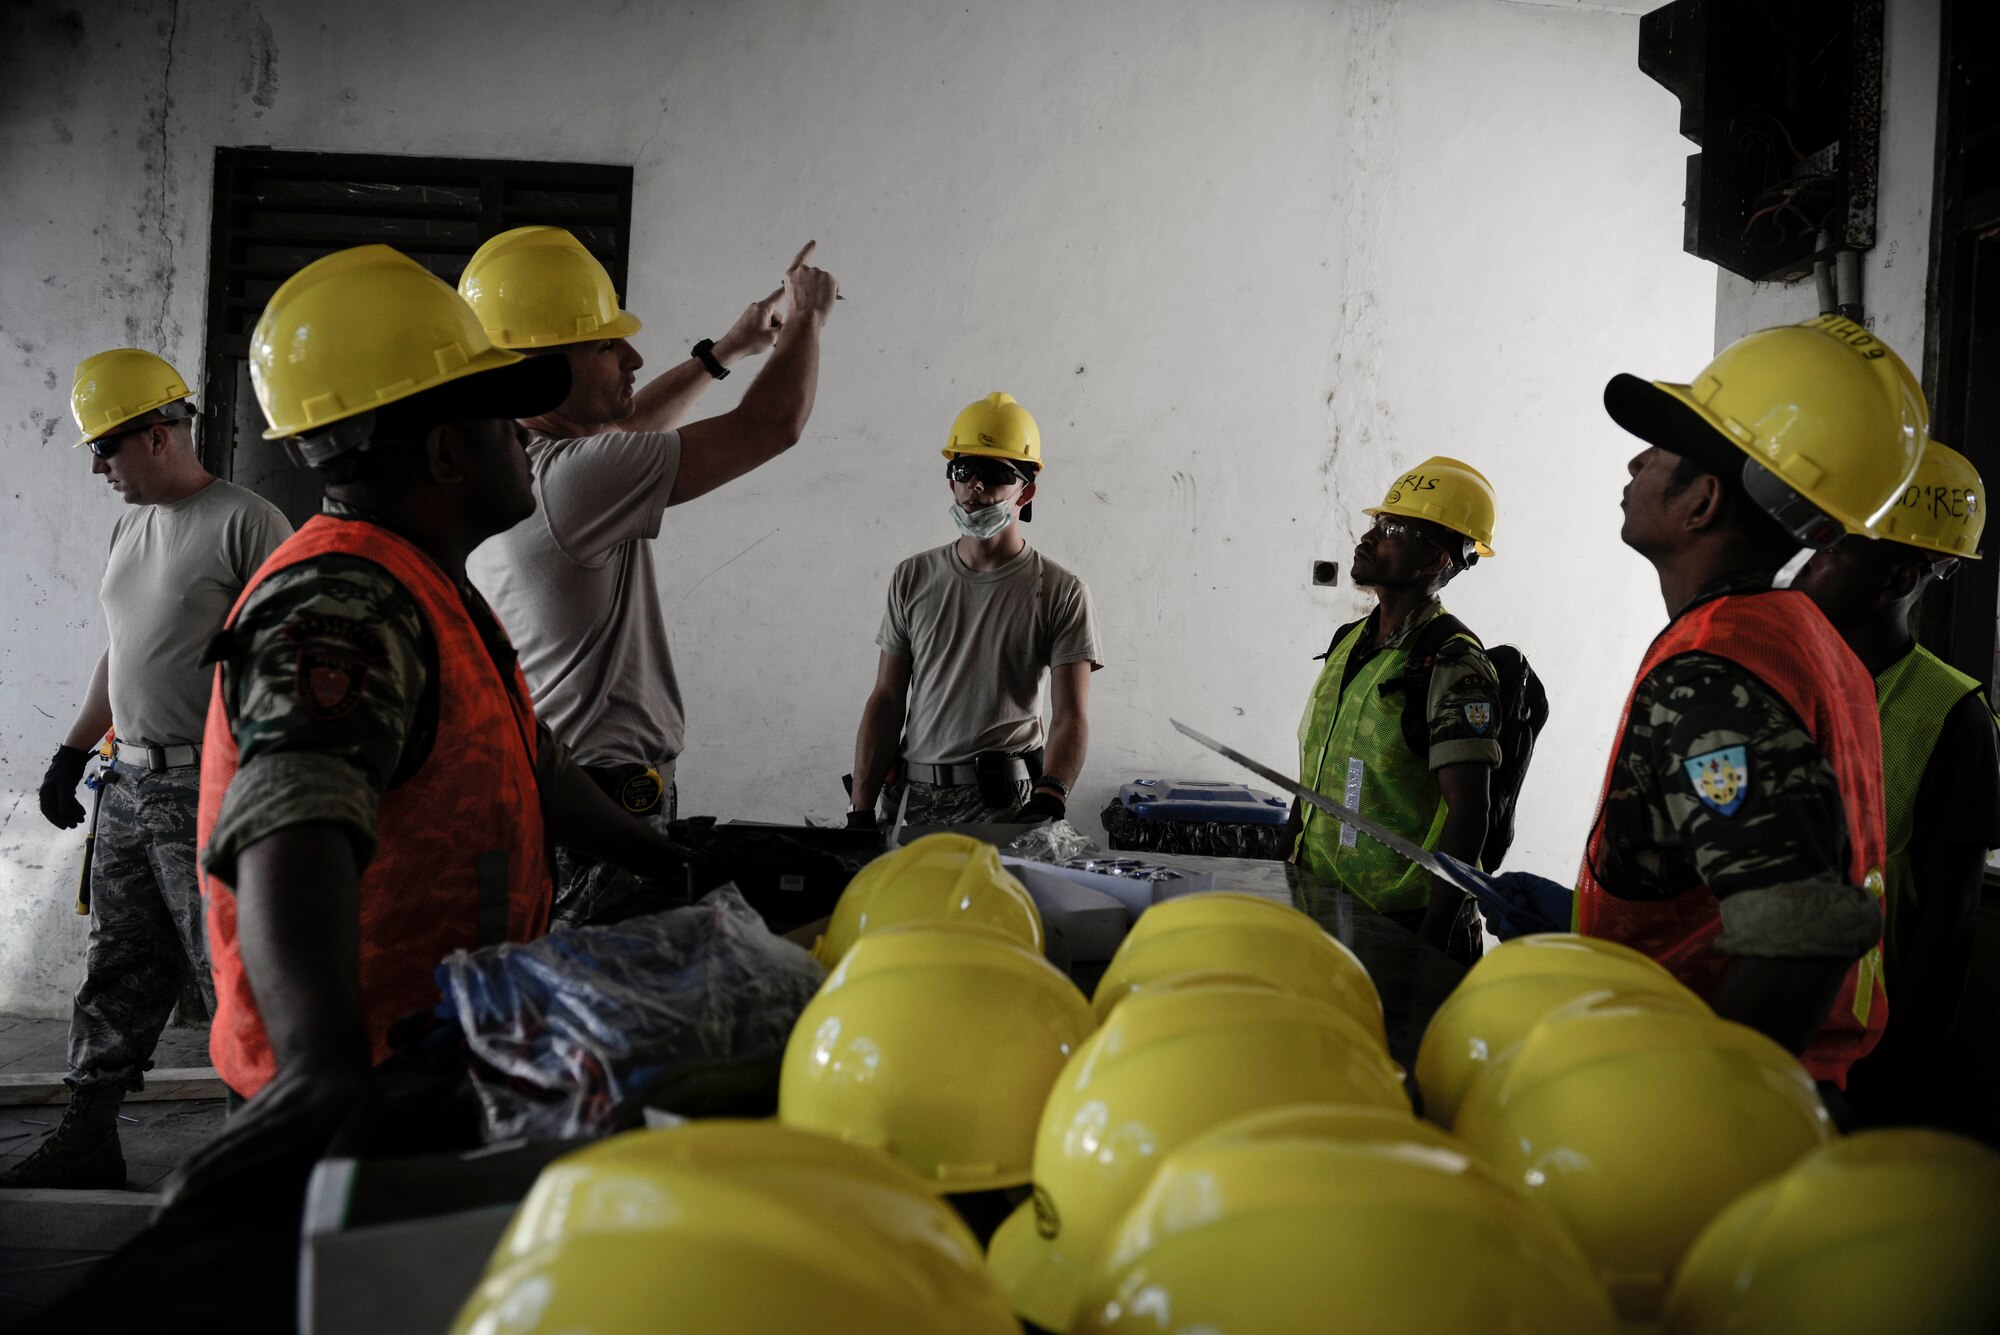 U.S. Airmen and soldiers of the Falintil-Forças de Defesa de Timor-Leste discuss construction plans during Operation Pacific-Angel 15-2, Sept. 5, 2015 in Baucau, Timor-Leste. Pacific Angel is a multilateral humanitarian assistance civil military operation, which improves military-to-military partnerships in the Pacific while also providing medical health outreach, civic engineering projects and subject matter exchanges among partner forces. (U.S. Air Force photo by Staff. Sgt. Alexander W. Riedel/Released)